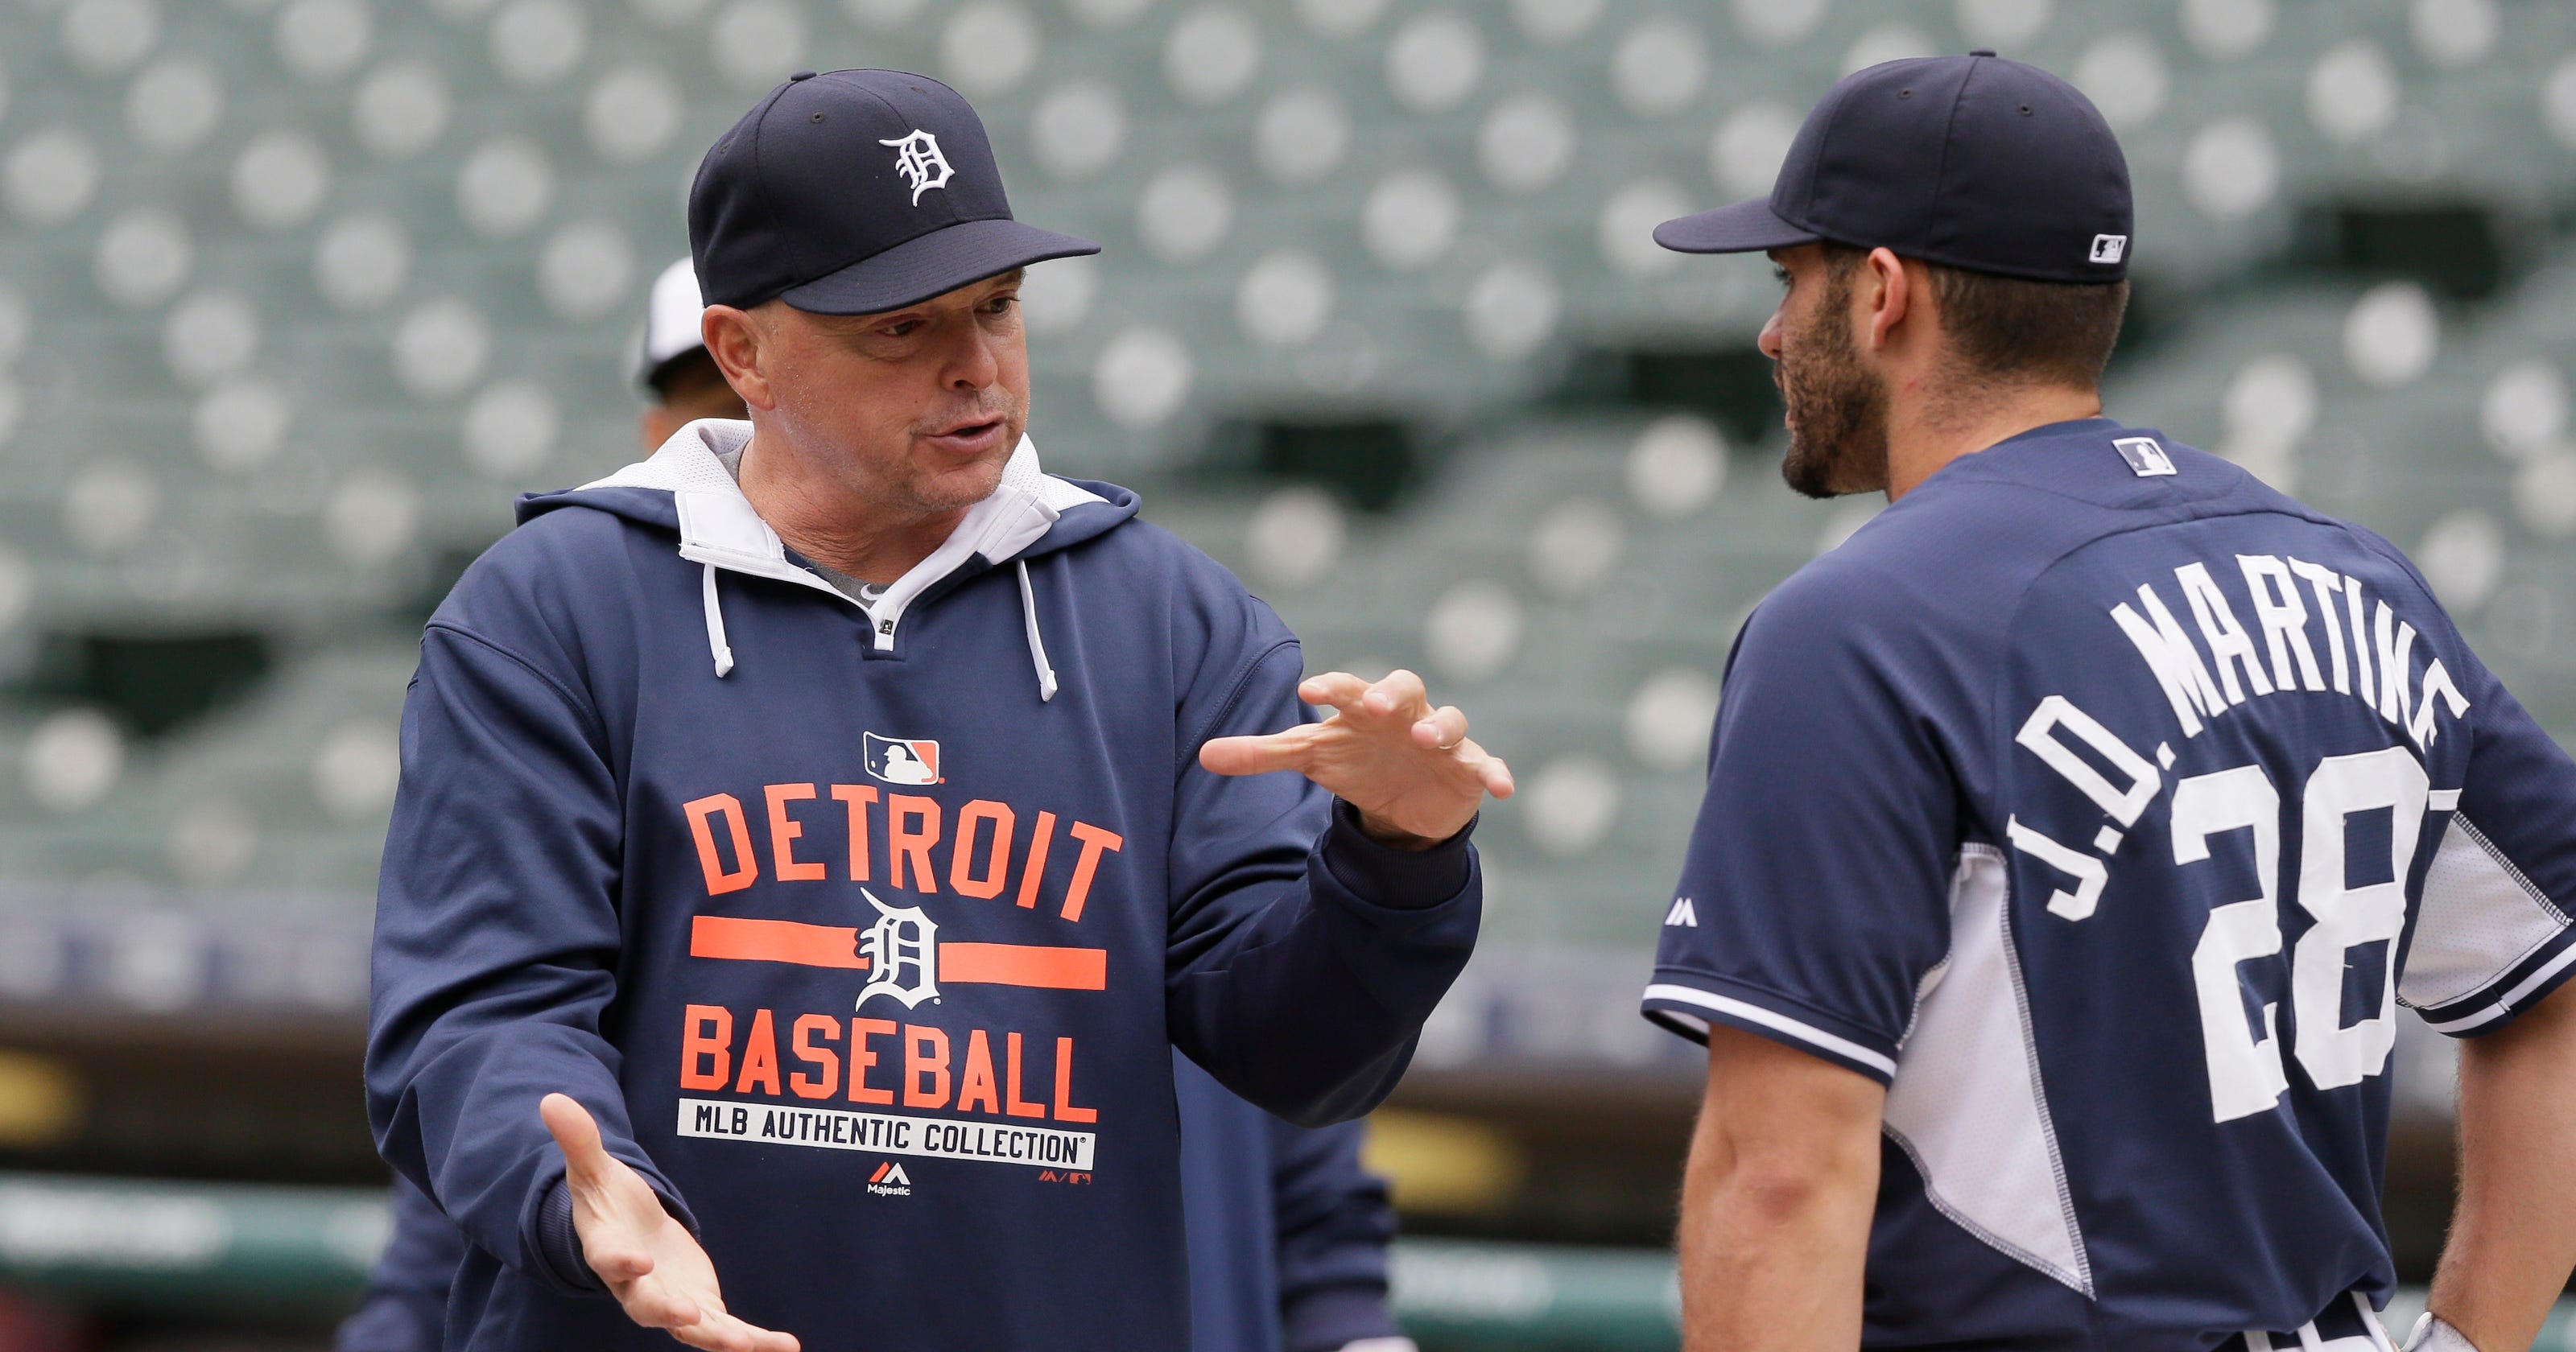 Detroit Tigers hitting coach Wally Joyner rides highs and lows of offense